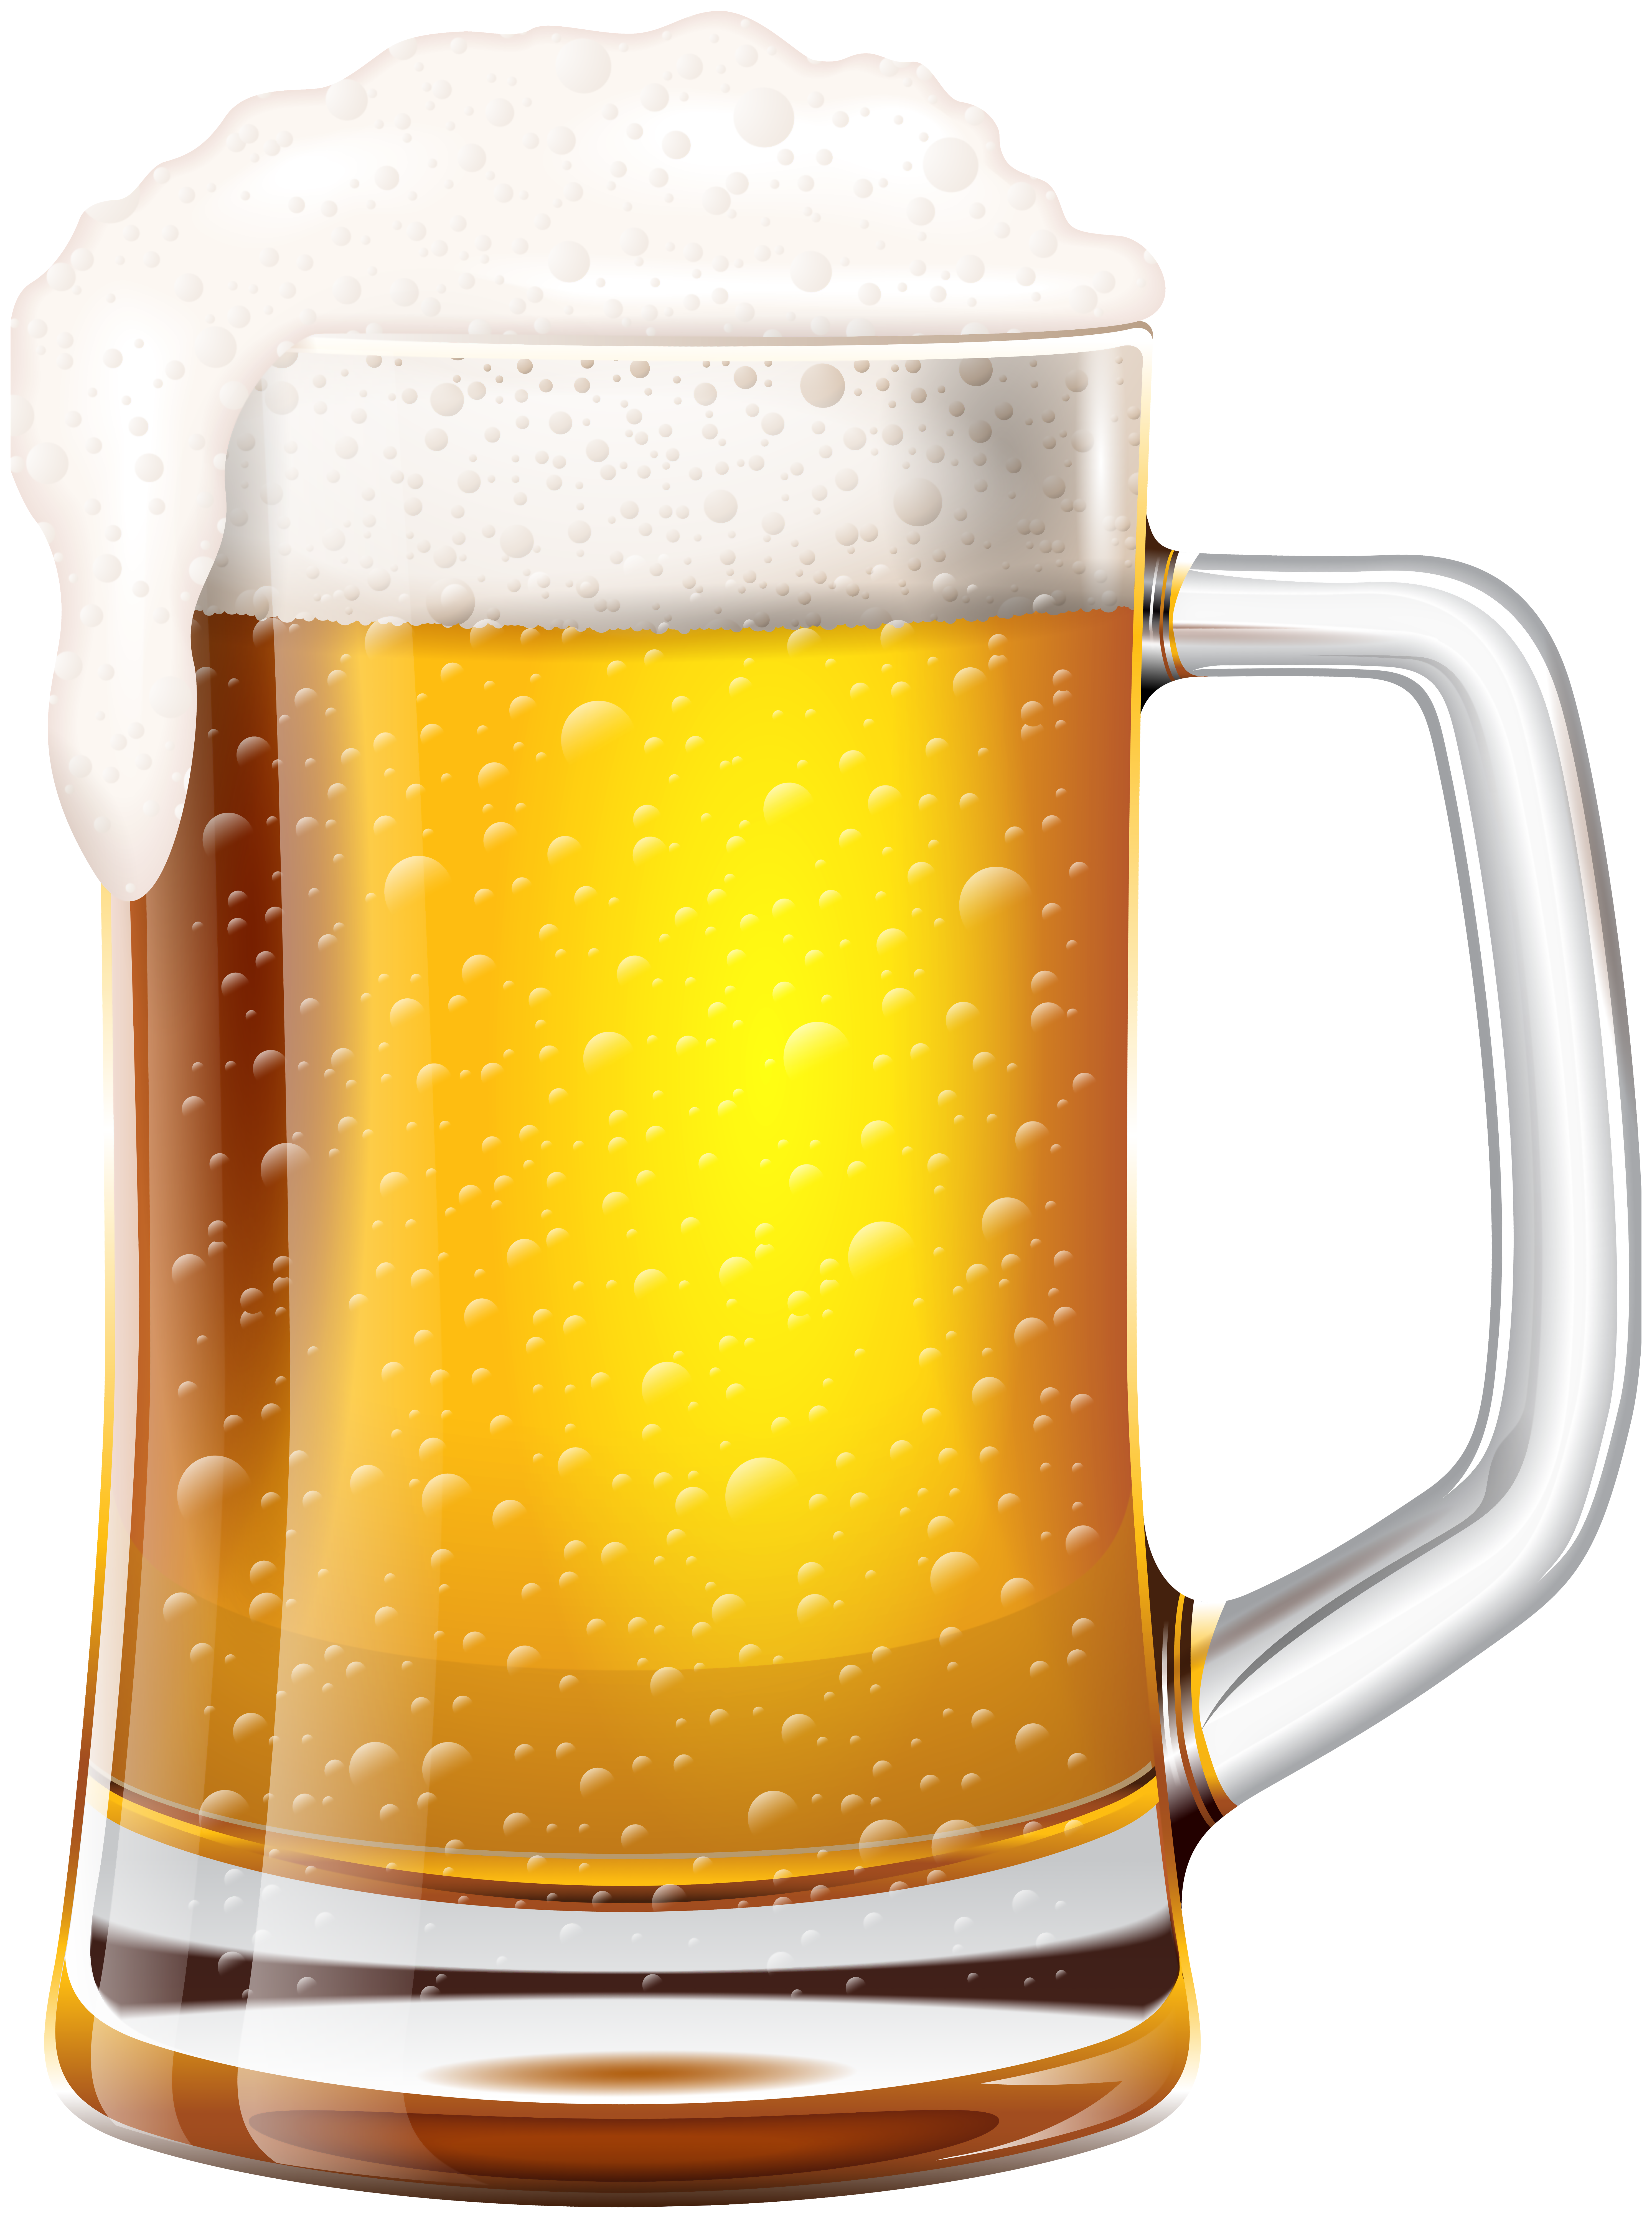 Clipart beer high resolution, Clipart beer high resolution Transparent